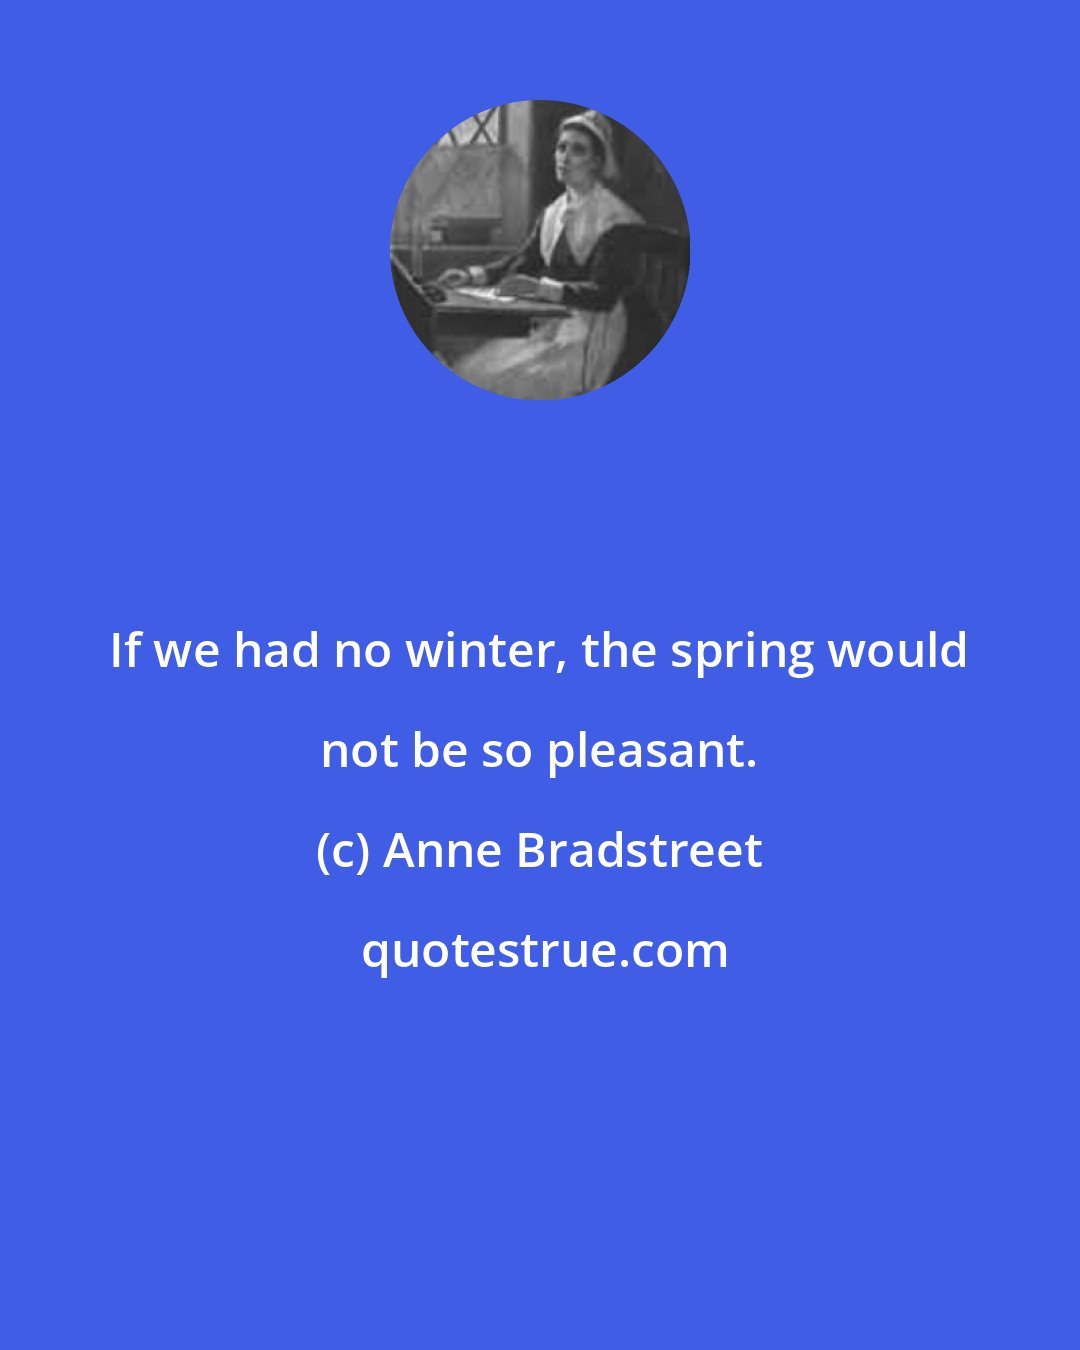 Anne Bradstreet: If we had no winter, the spring would not be so pleasant.